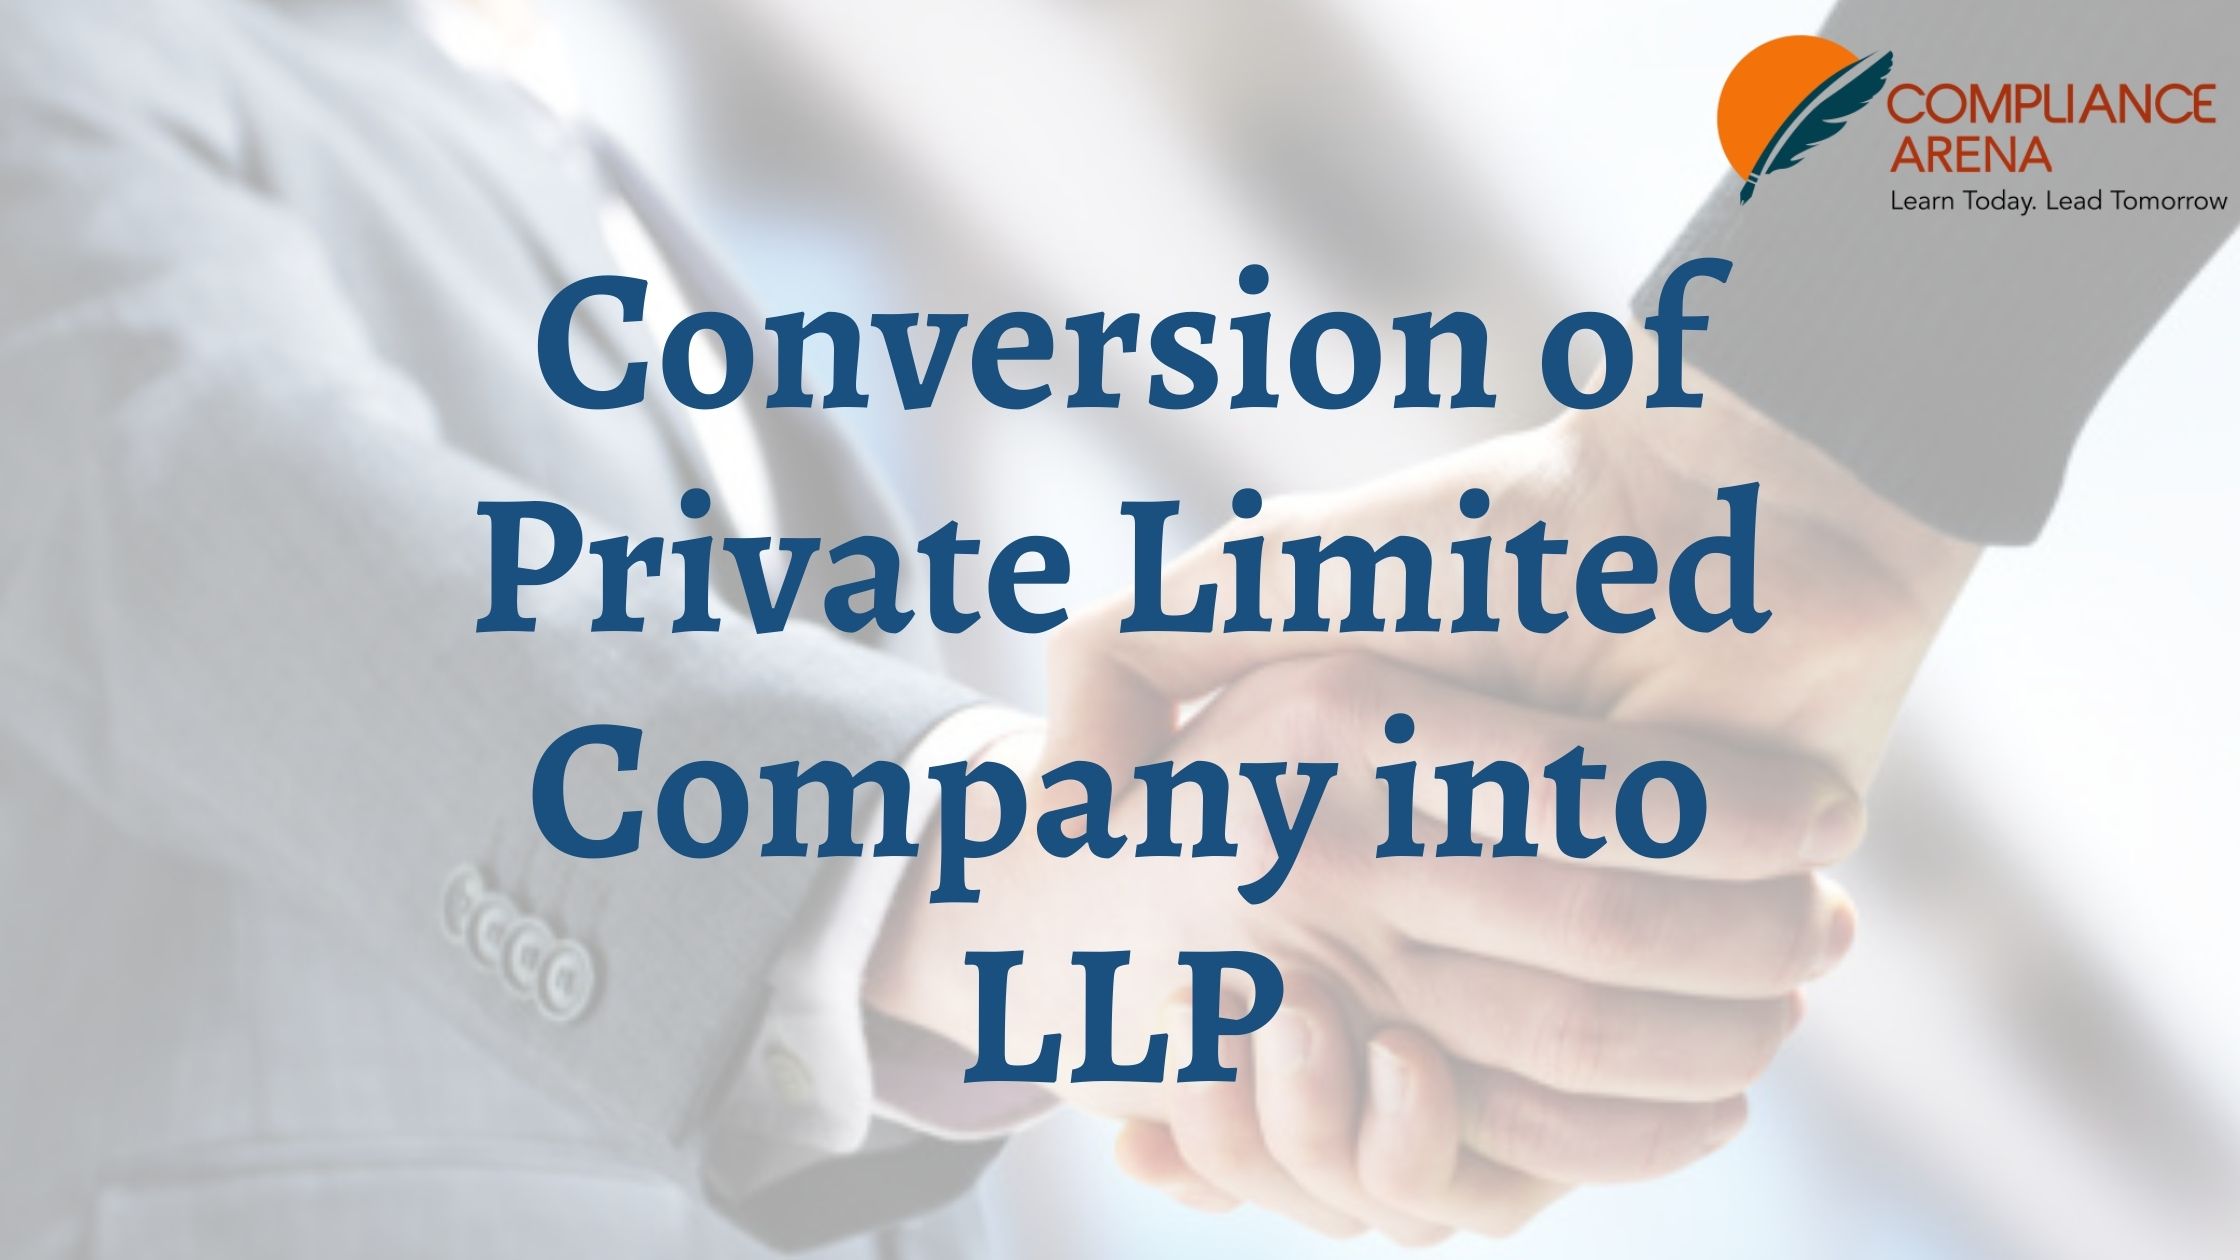 Conversion of Private Limited to LLP